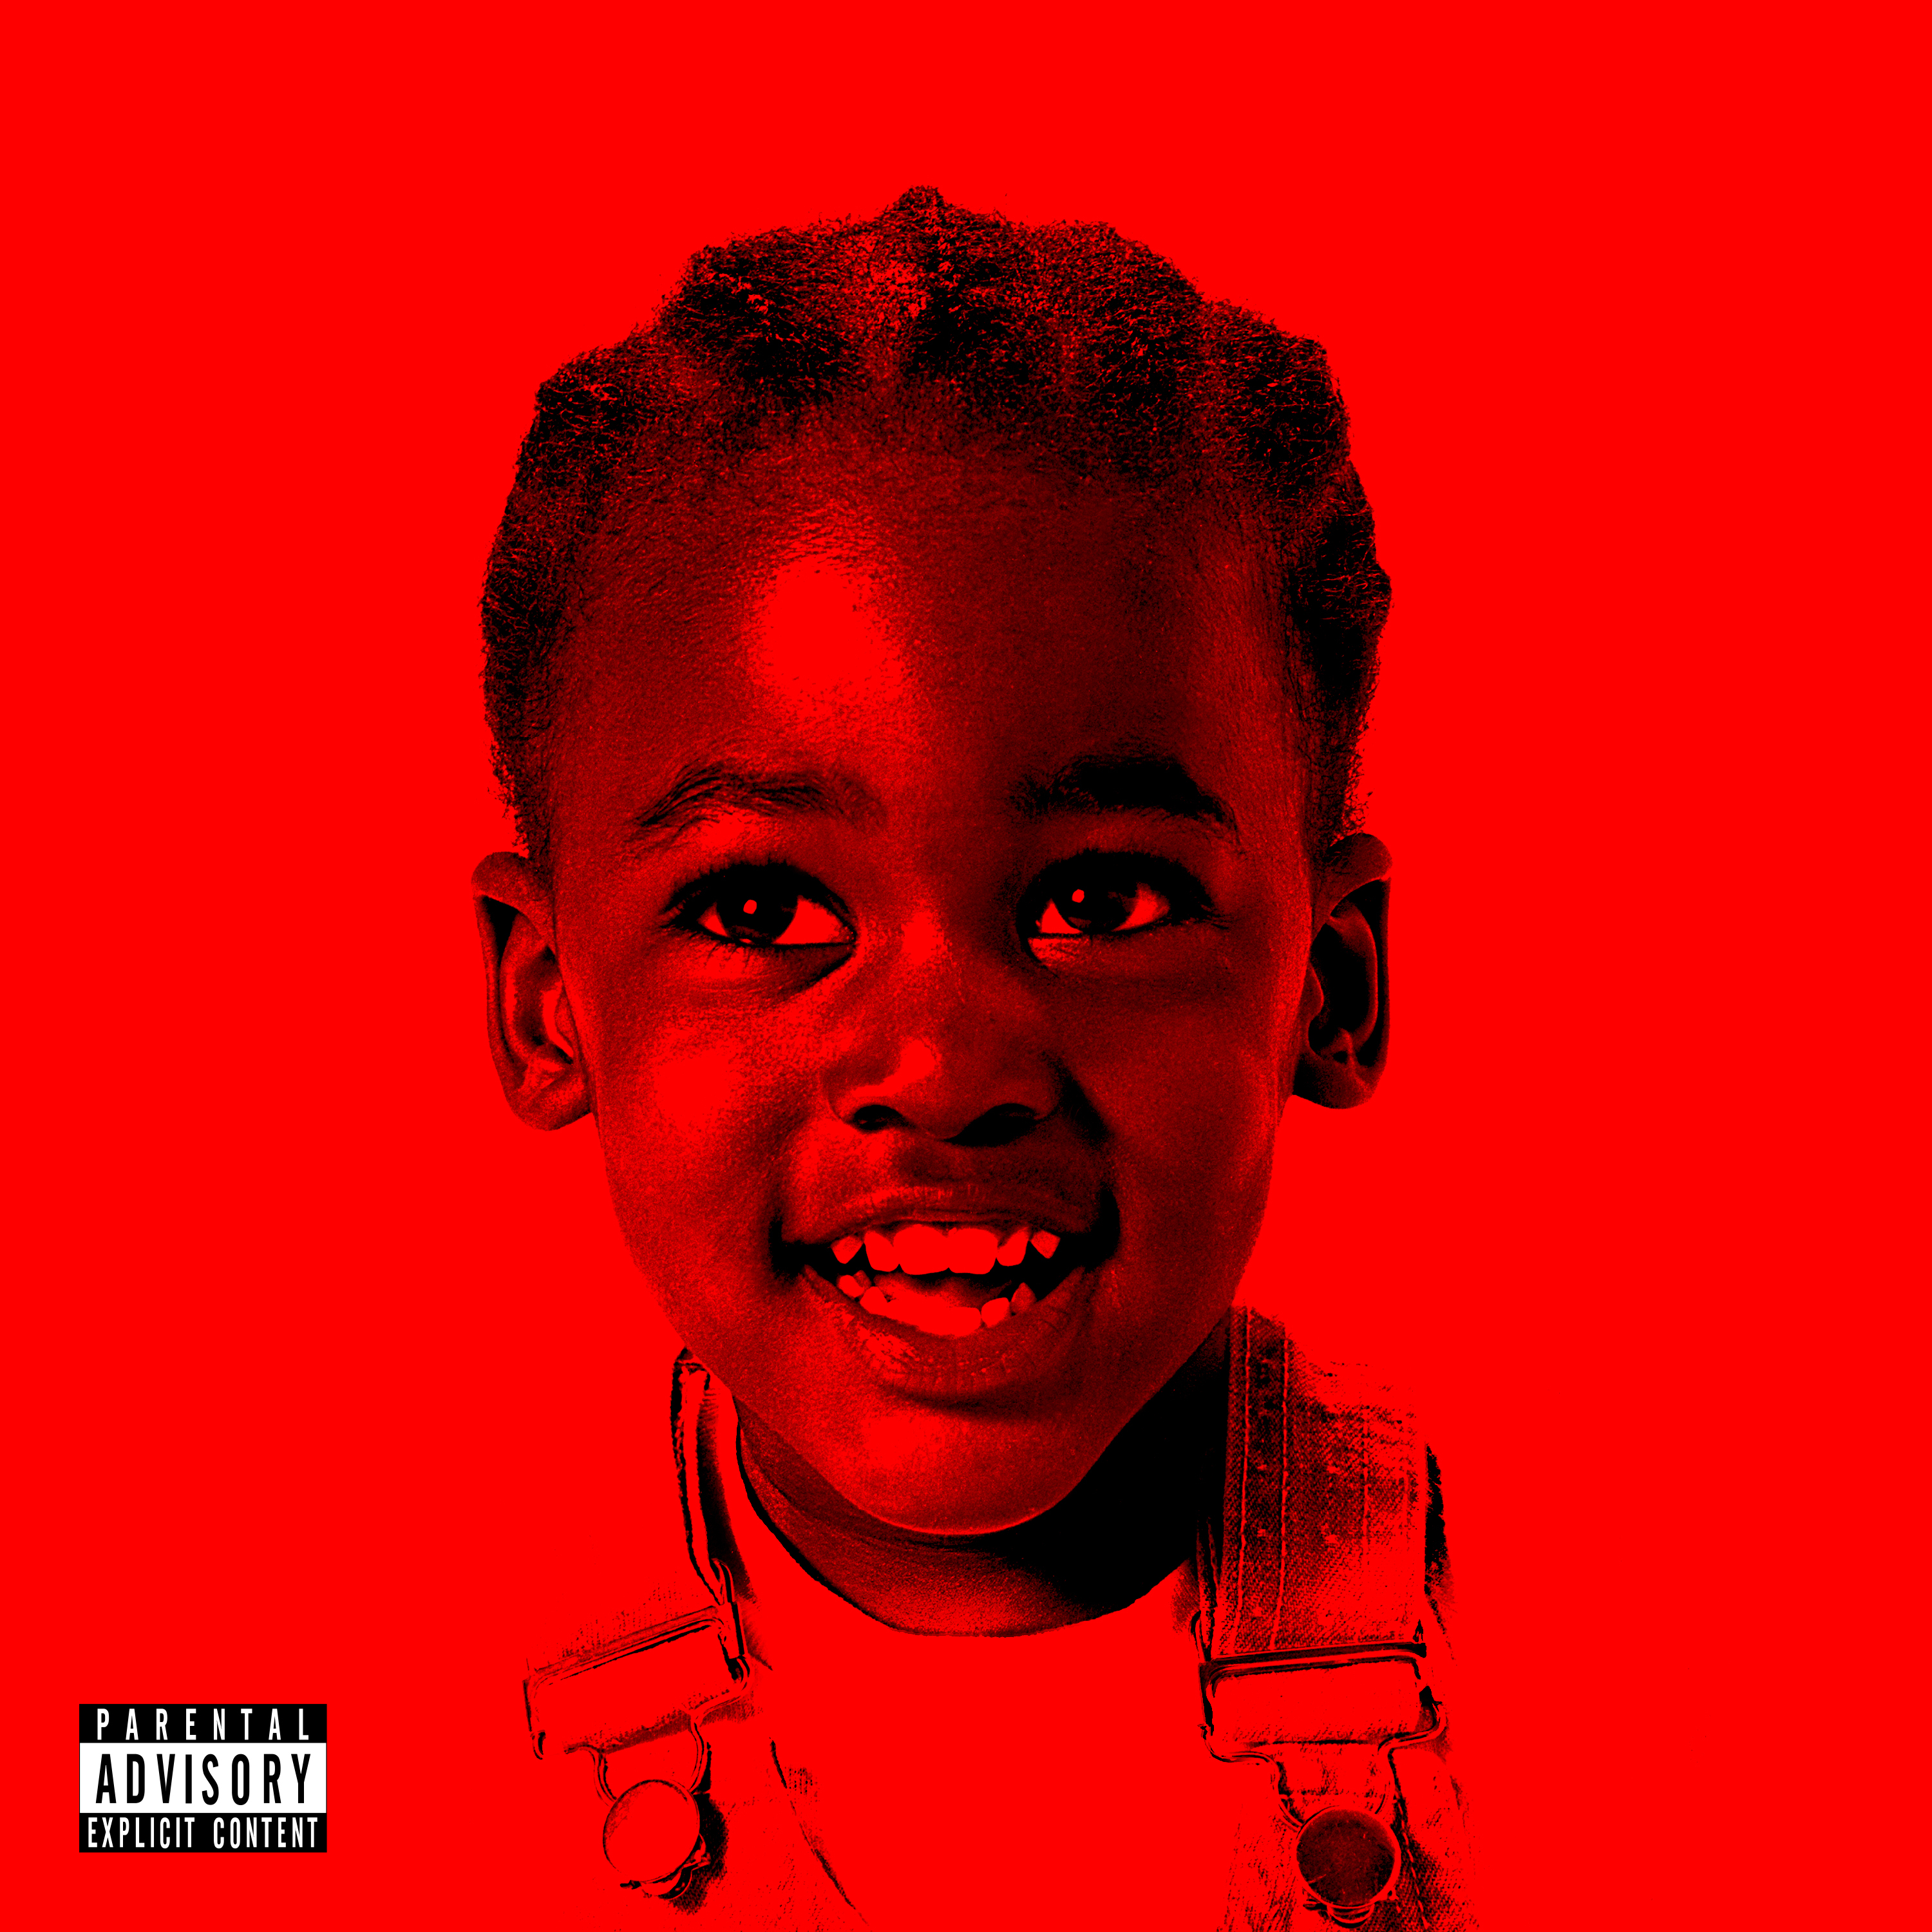 Child smiling on a red background with a &quot;Parental Advisory Explicit Content&quot; label in the corner